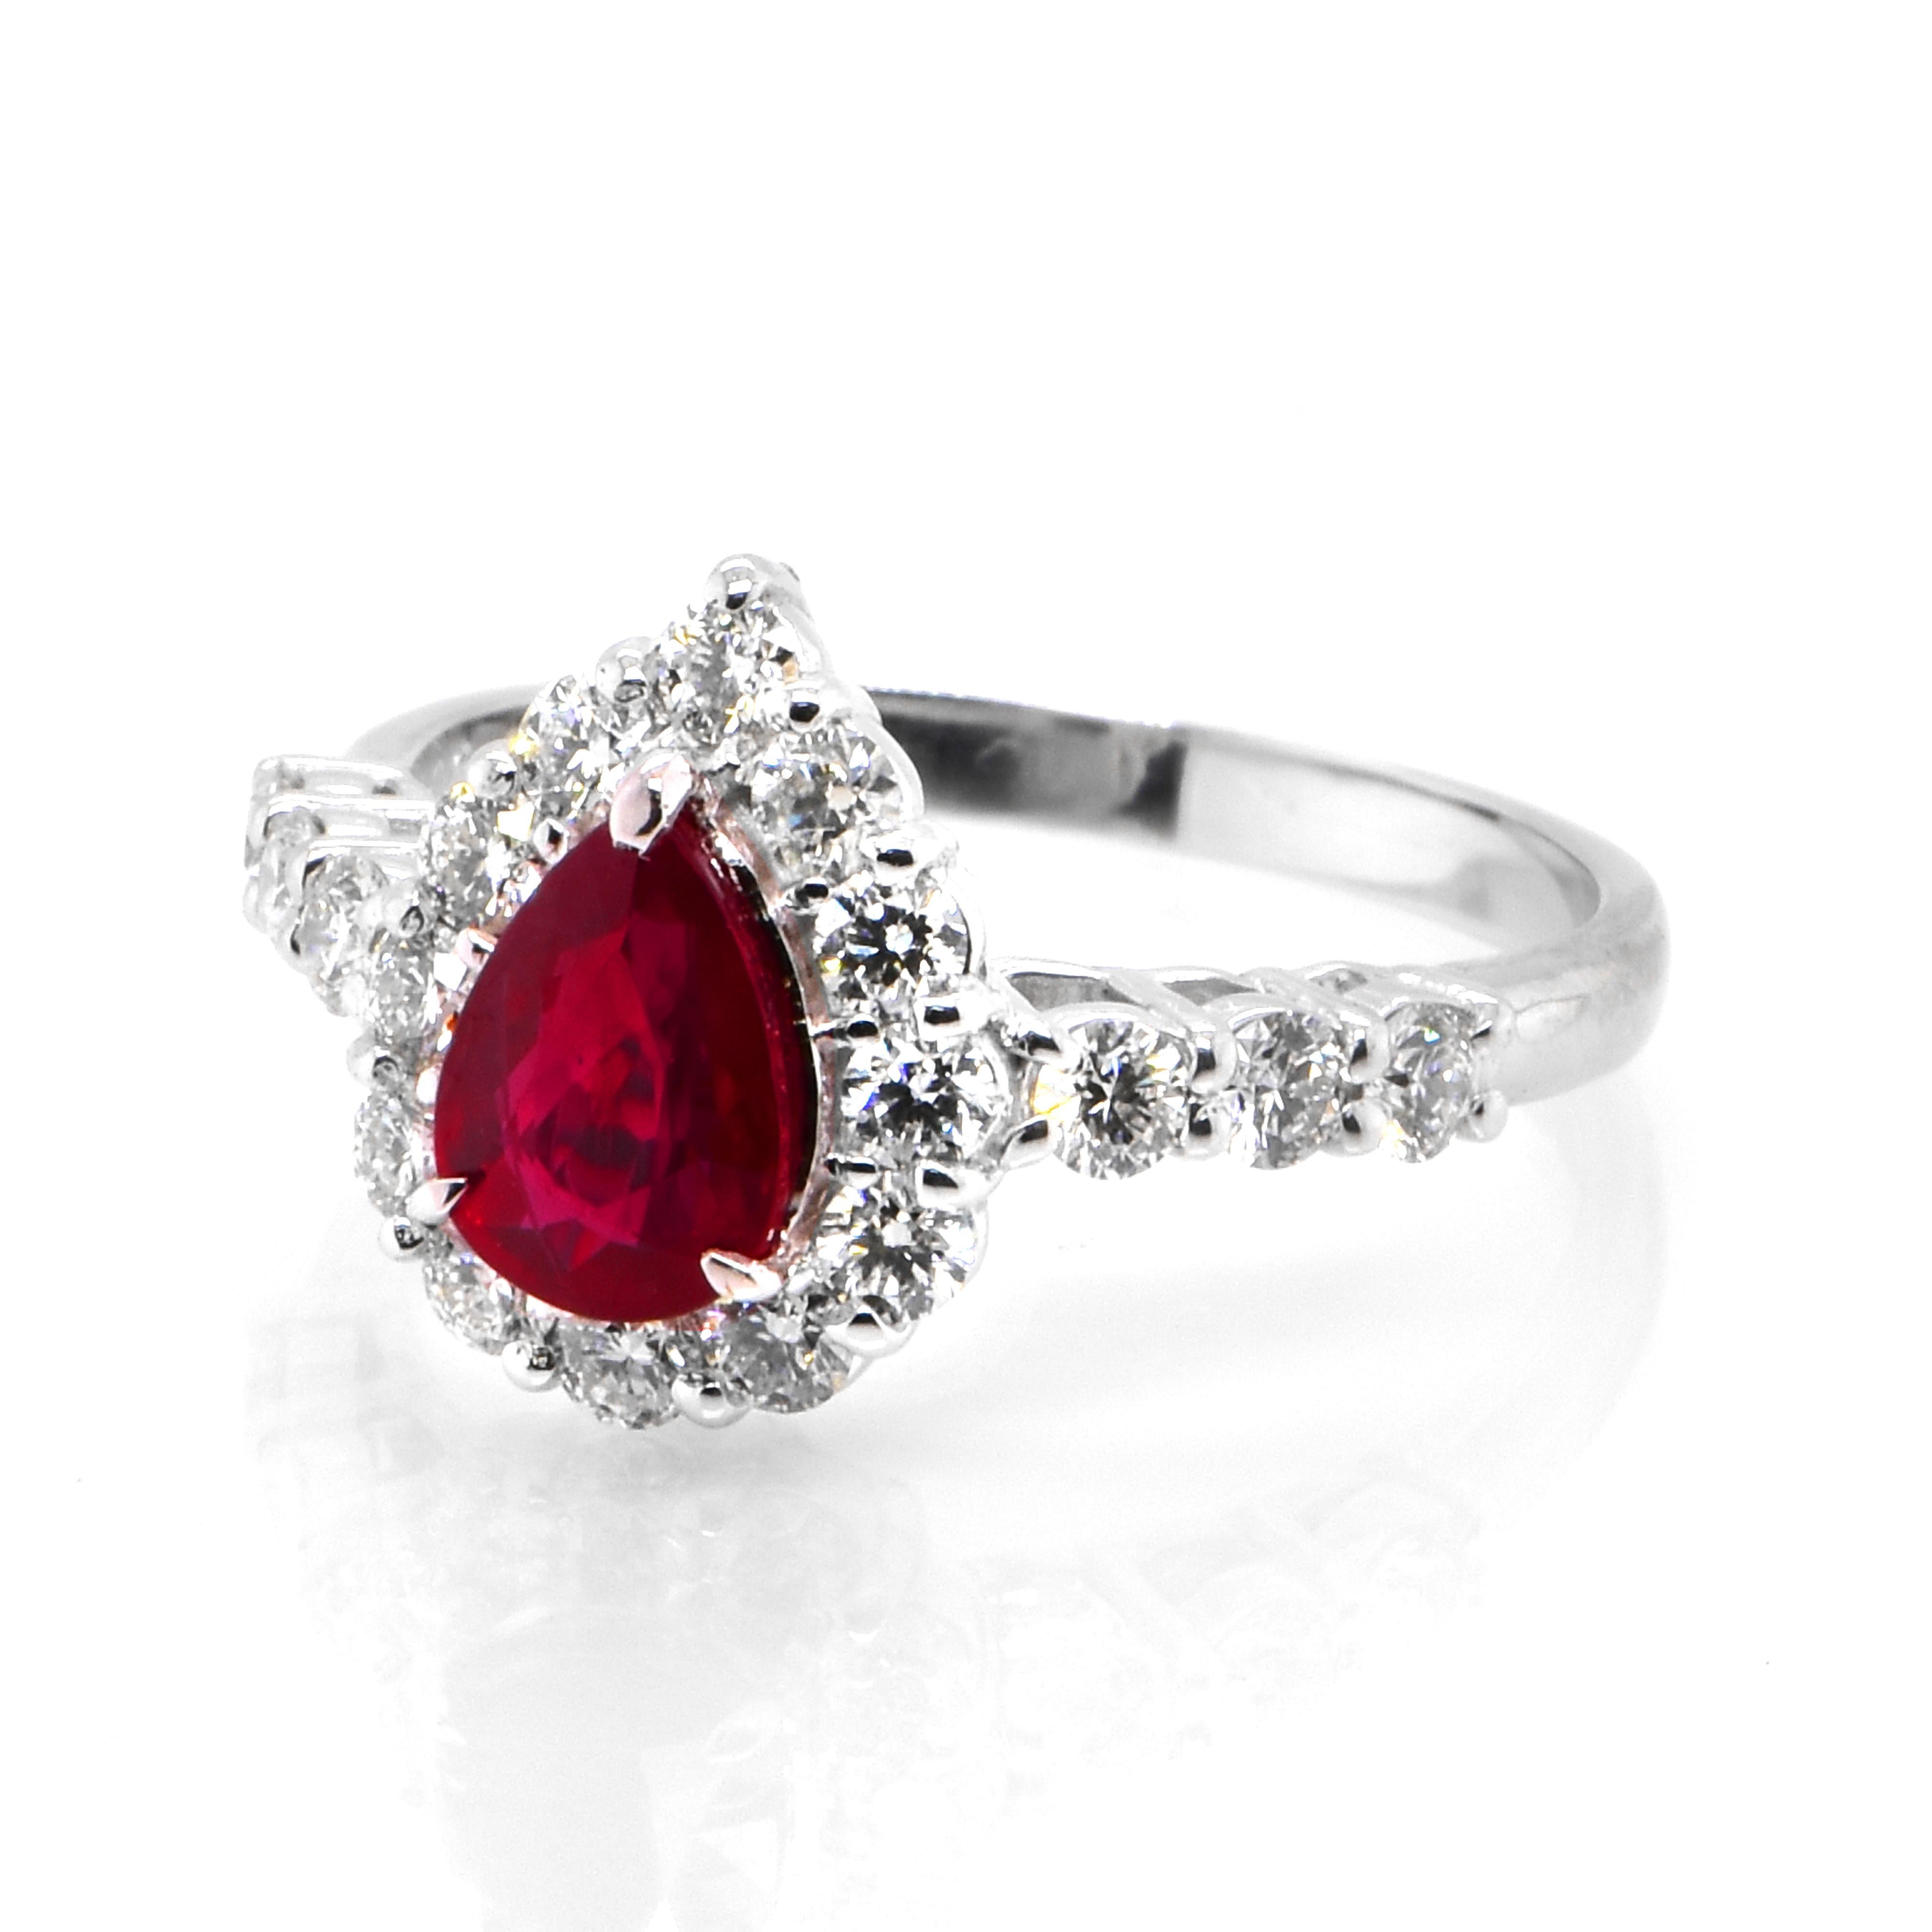 A beautiful Ring set in Platinum featuring a GIA Certified 1.03 Carat Natural, Pigeons Blood Red, Burmese Ruby and 0.68 Carat Diamonds. Rubies are referred to as 